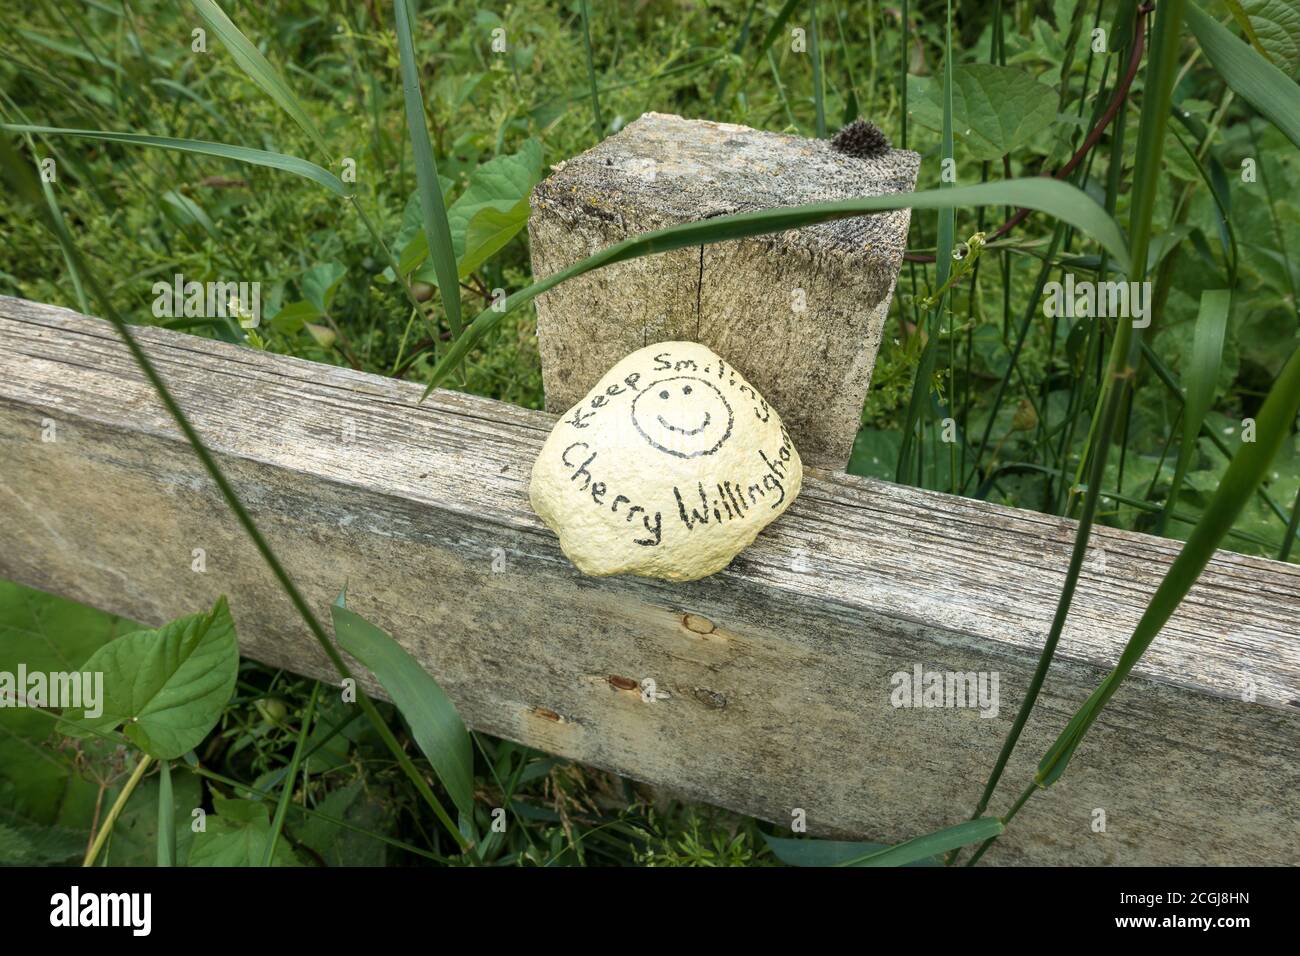 Happy stone on fence during pandemic Cherry Willingham June 2020 Stock Photo